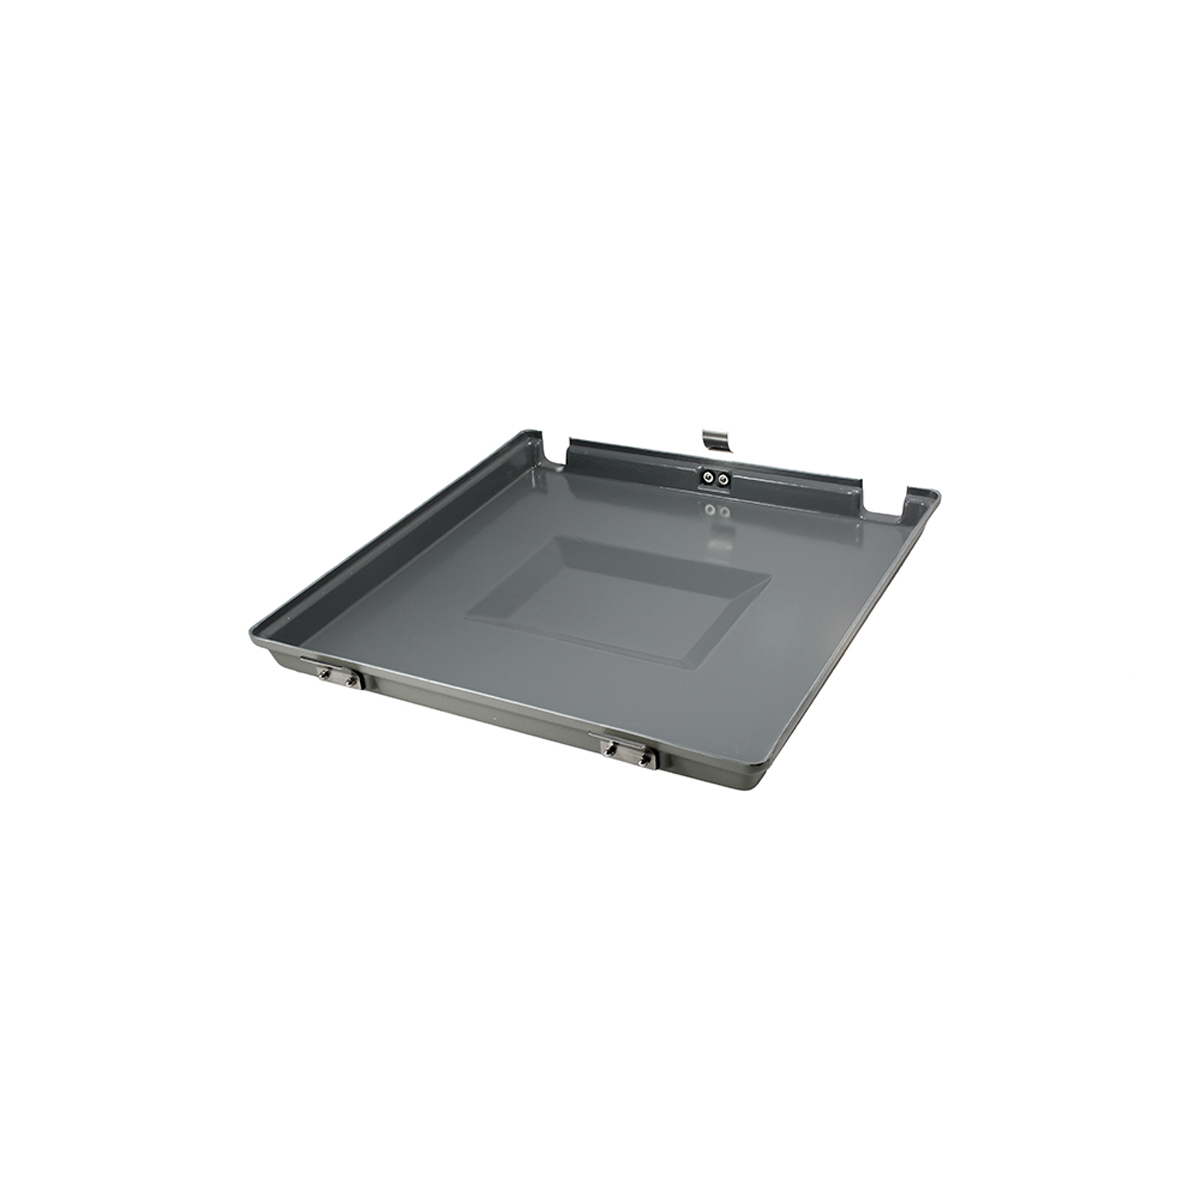 Hobart 290861 Equivalent Upper Door (Gray Plastic) for Band Saws 5700, 5701 and 5801 image 1